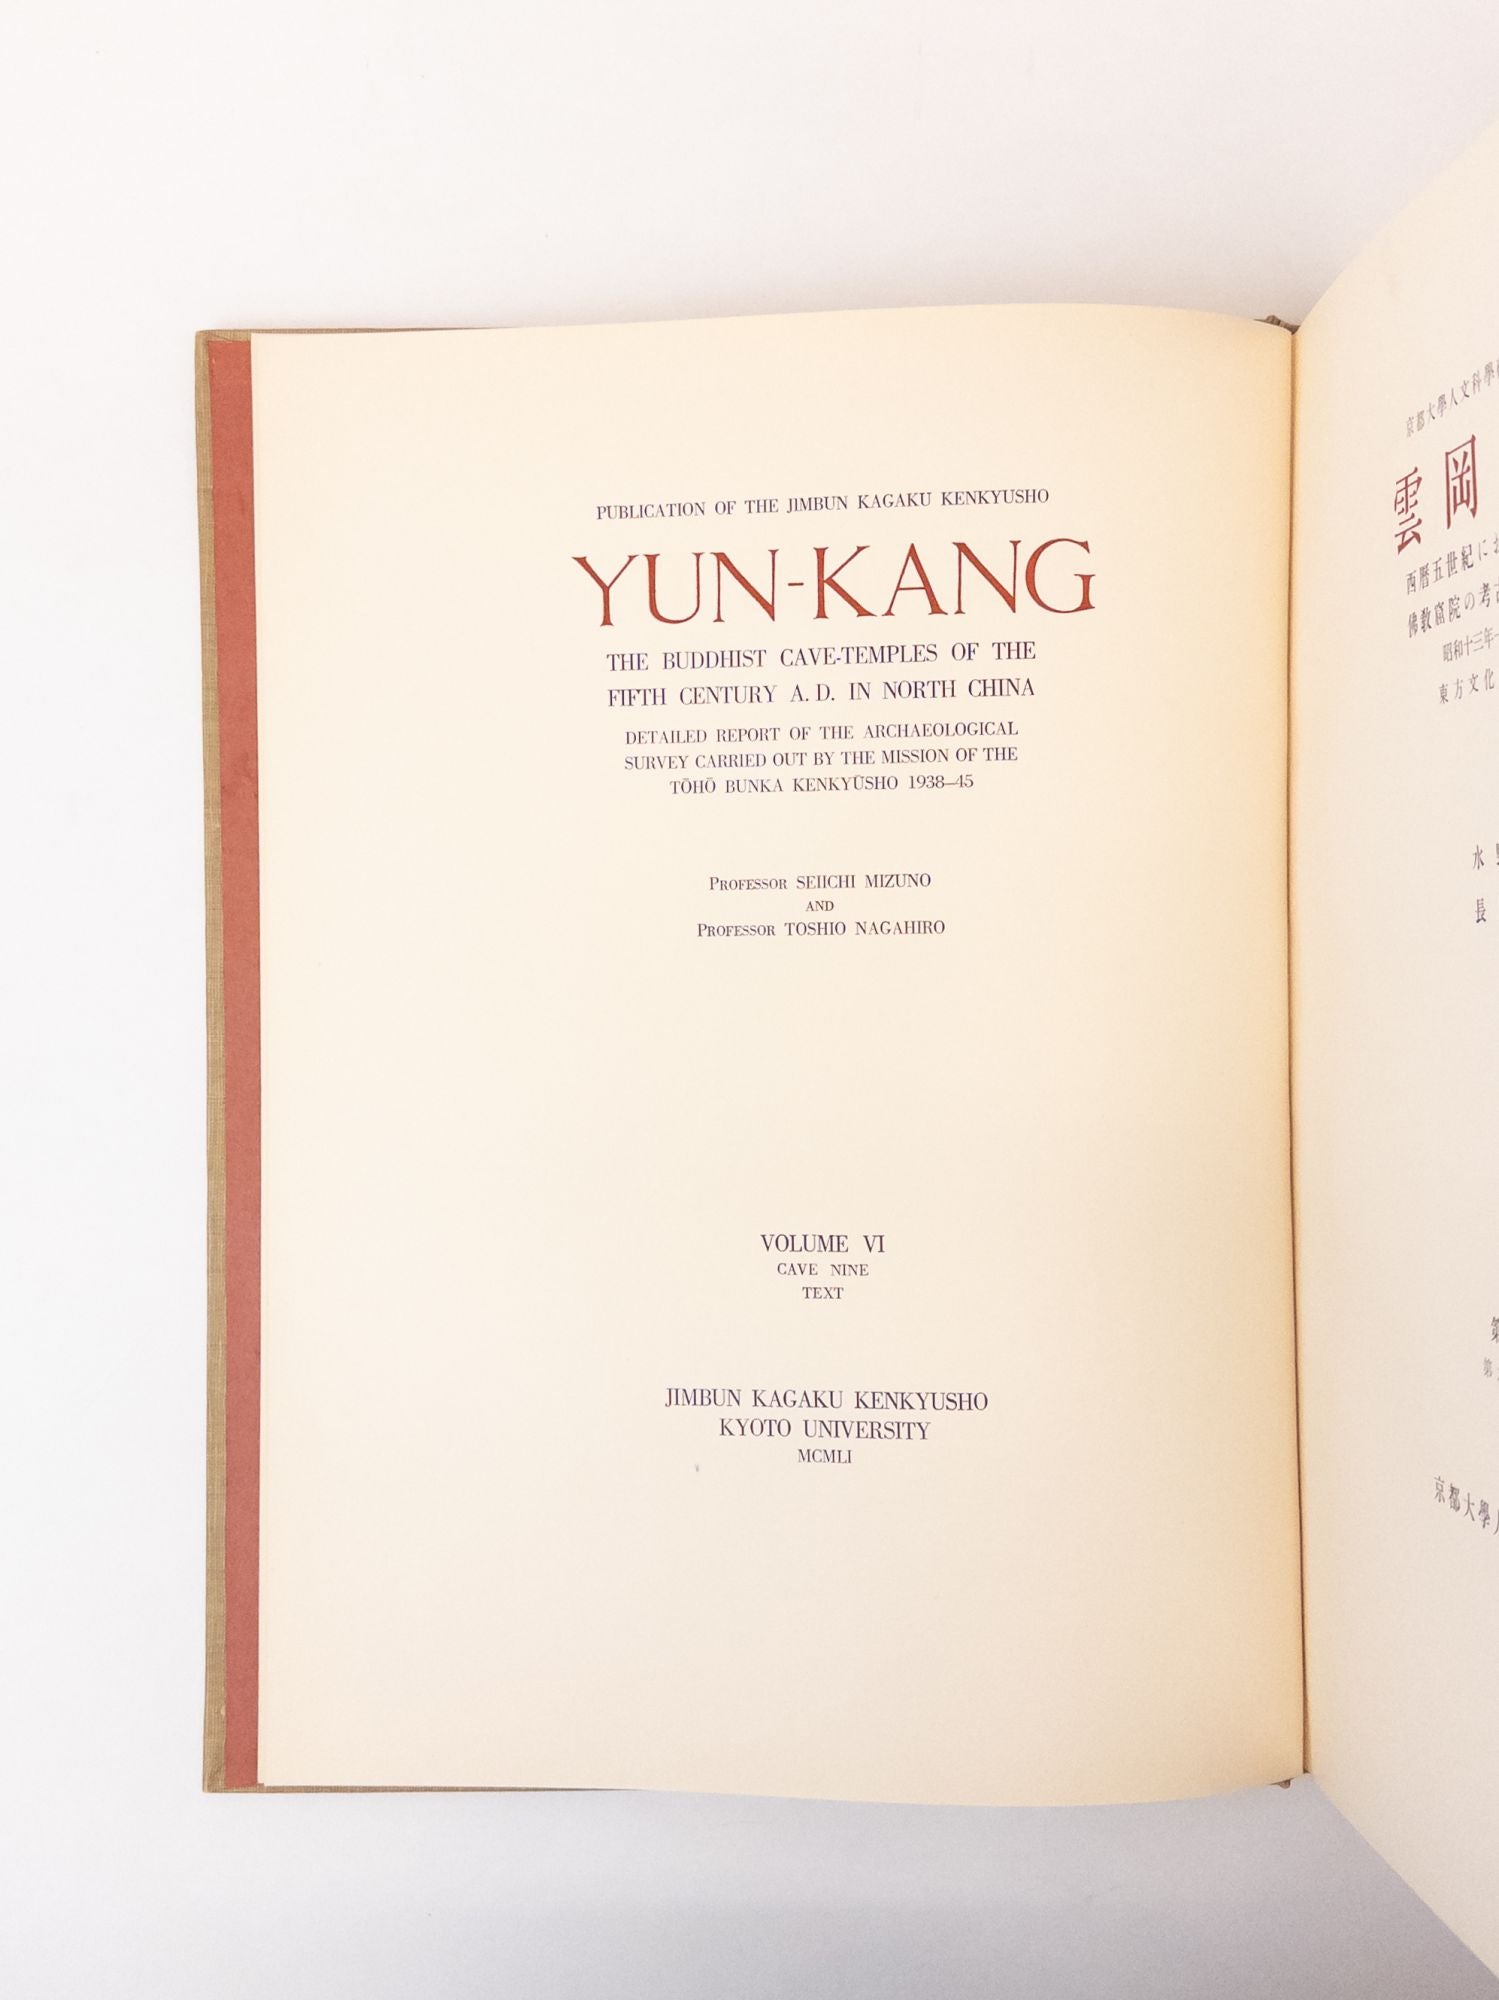 Product Image for YUN-KANG: THE BUDDHIST CAVE-TEMPLES OF THE FIFTH CENTURY A.D. IN NORTH CHINA: CAVE NINE: TEXT [and] CAVE NINE: PLATES [Volume VI Only, In Two Books]